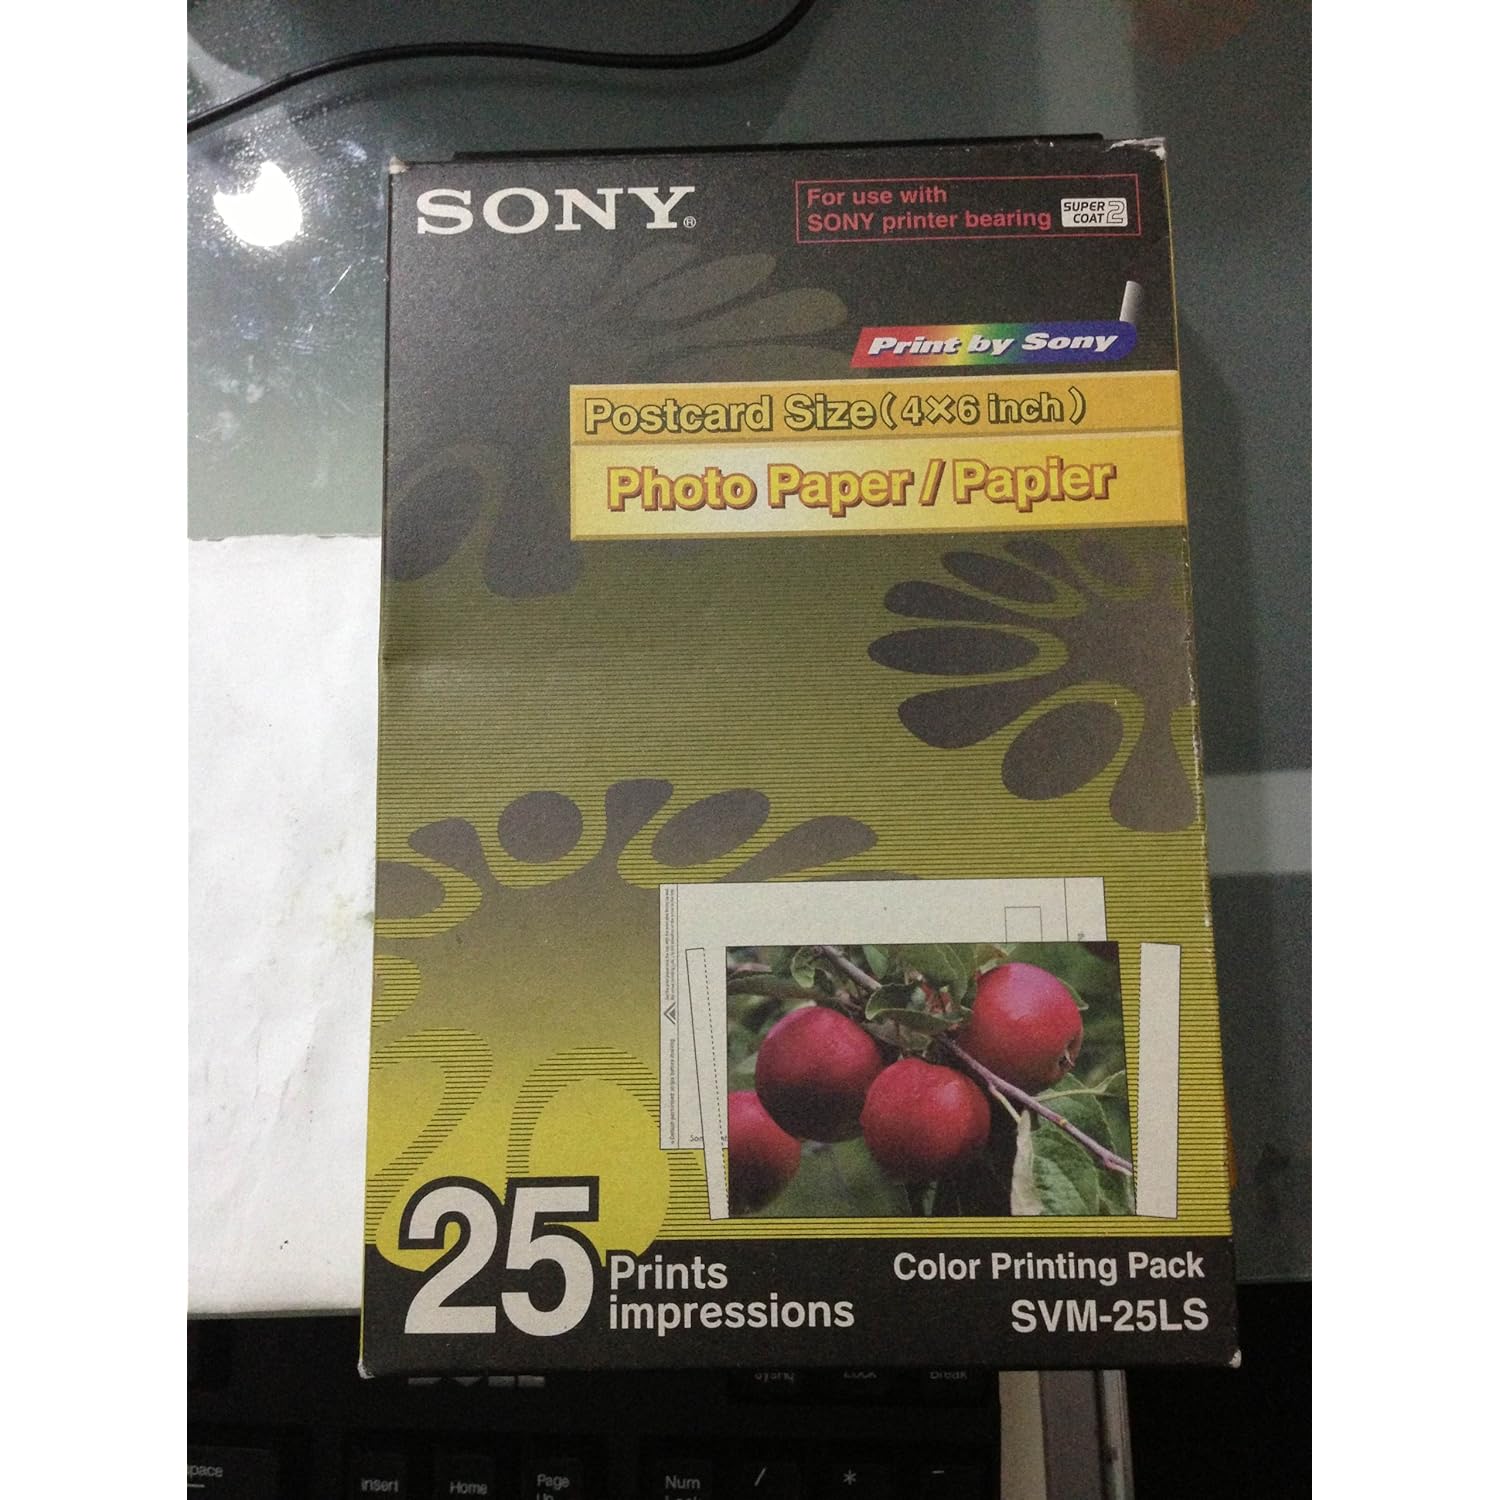 Sony SVM-25LS Color Printing Pack, Cartridge and Postcard Size Photo Paper